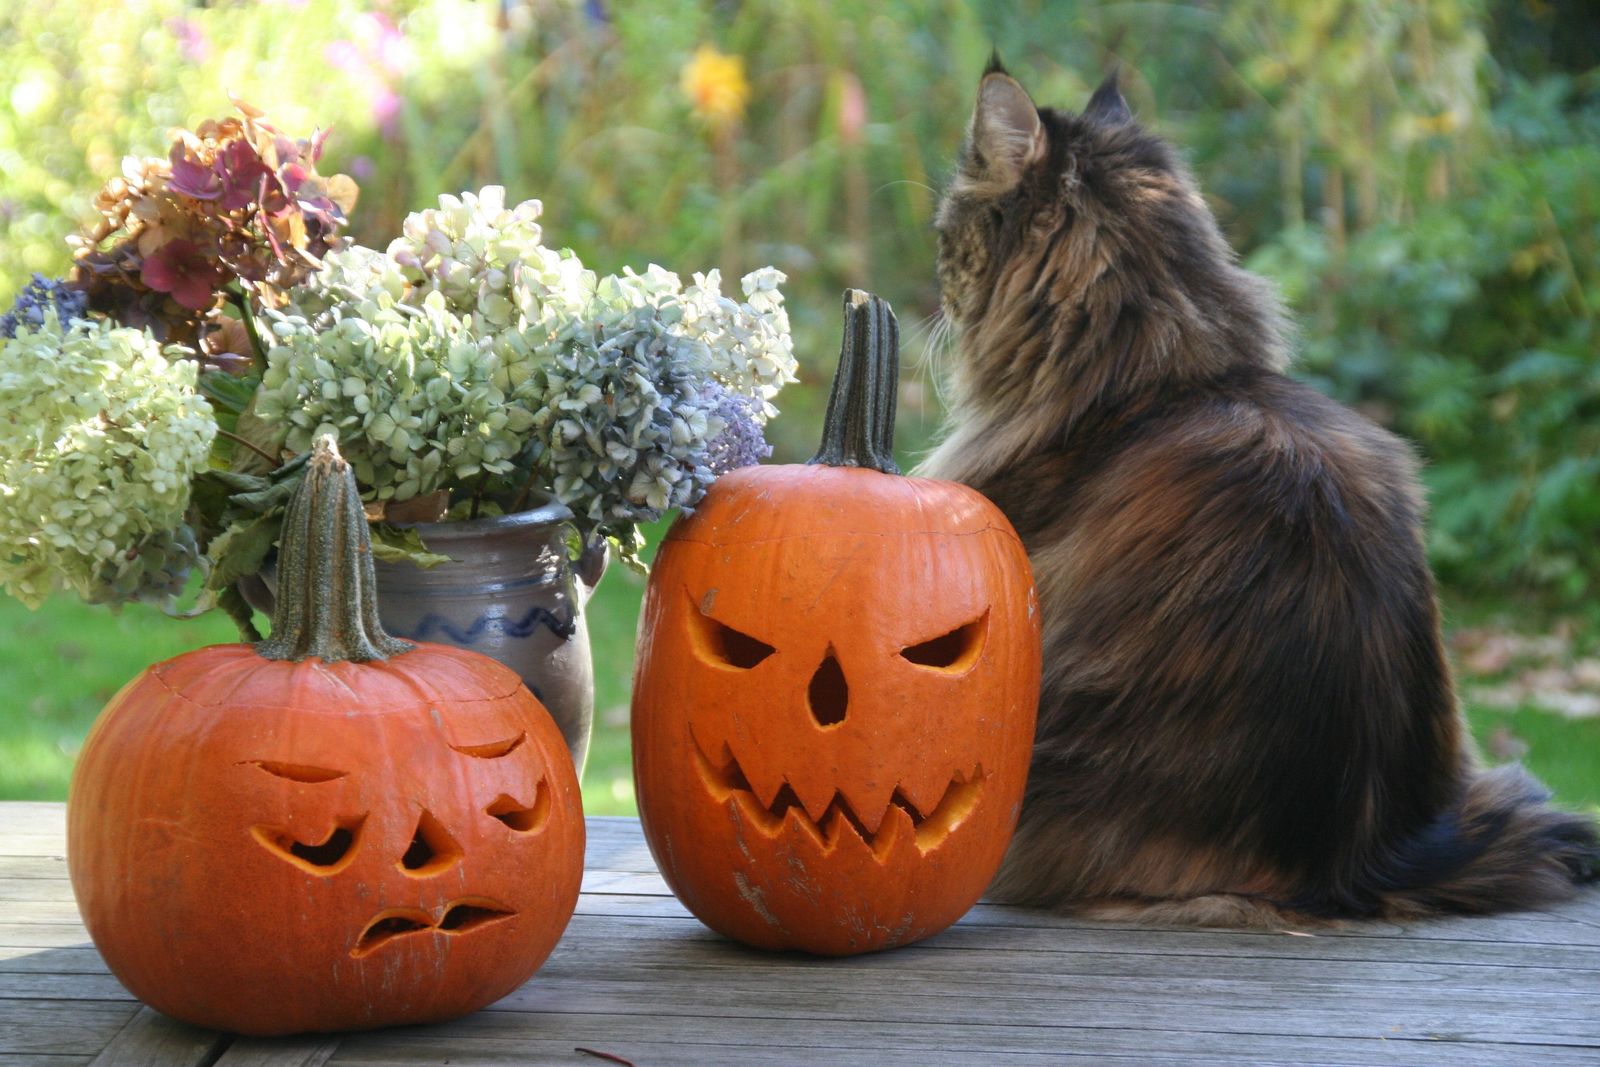 Do’s and don’ts for Halloween fun with your cat - Cat sitting on porch with pumpkins